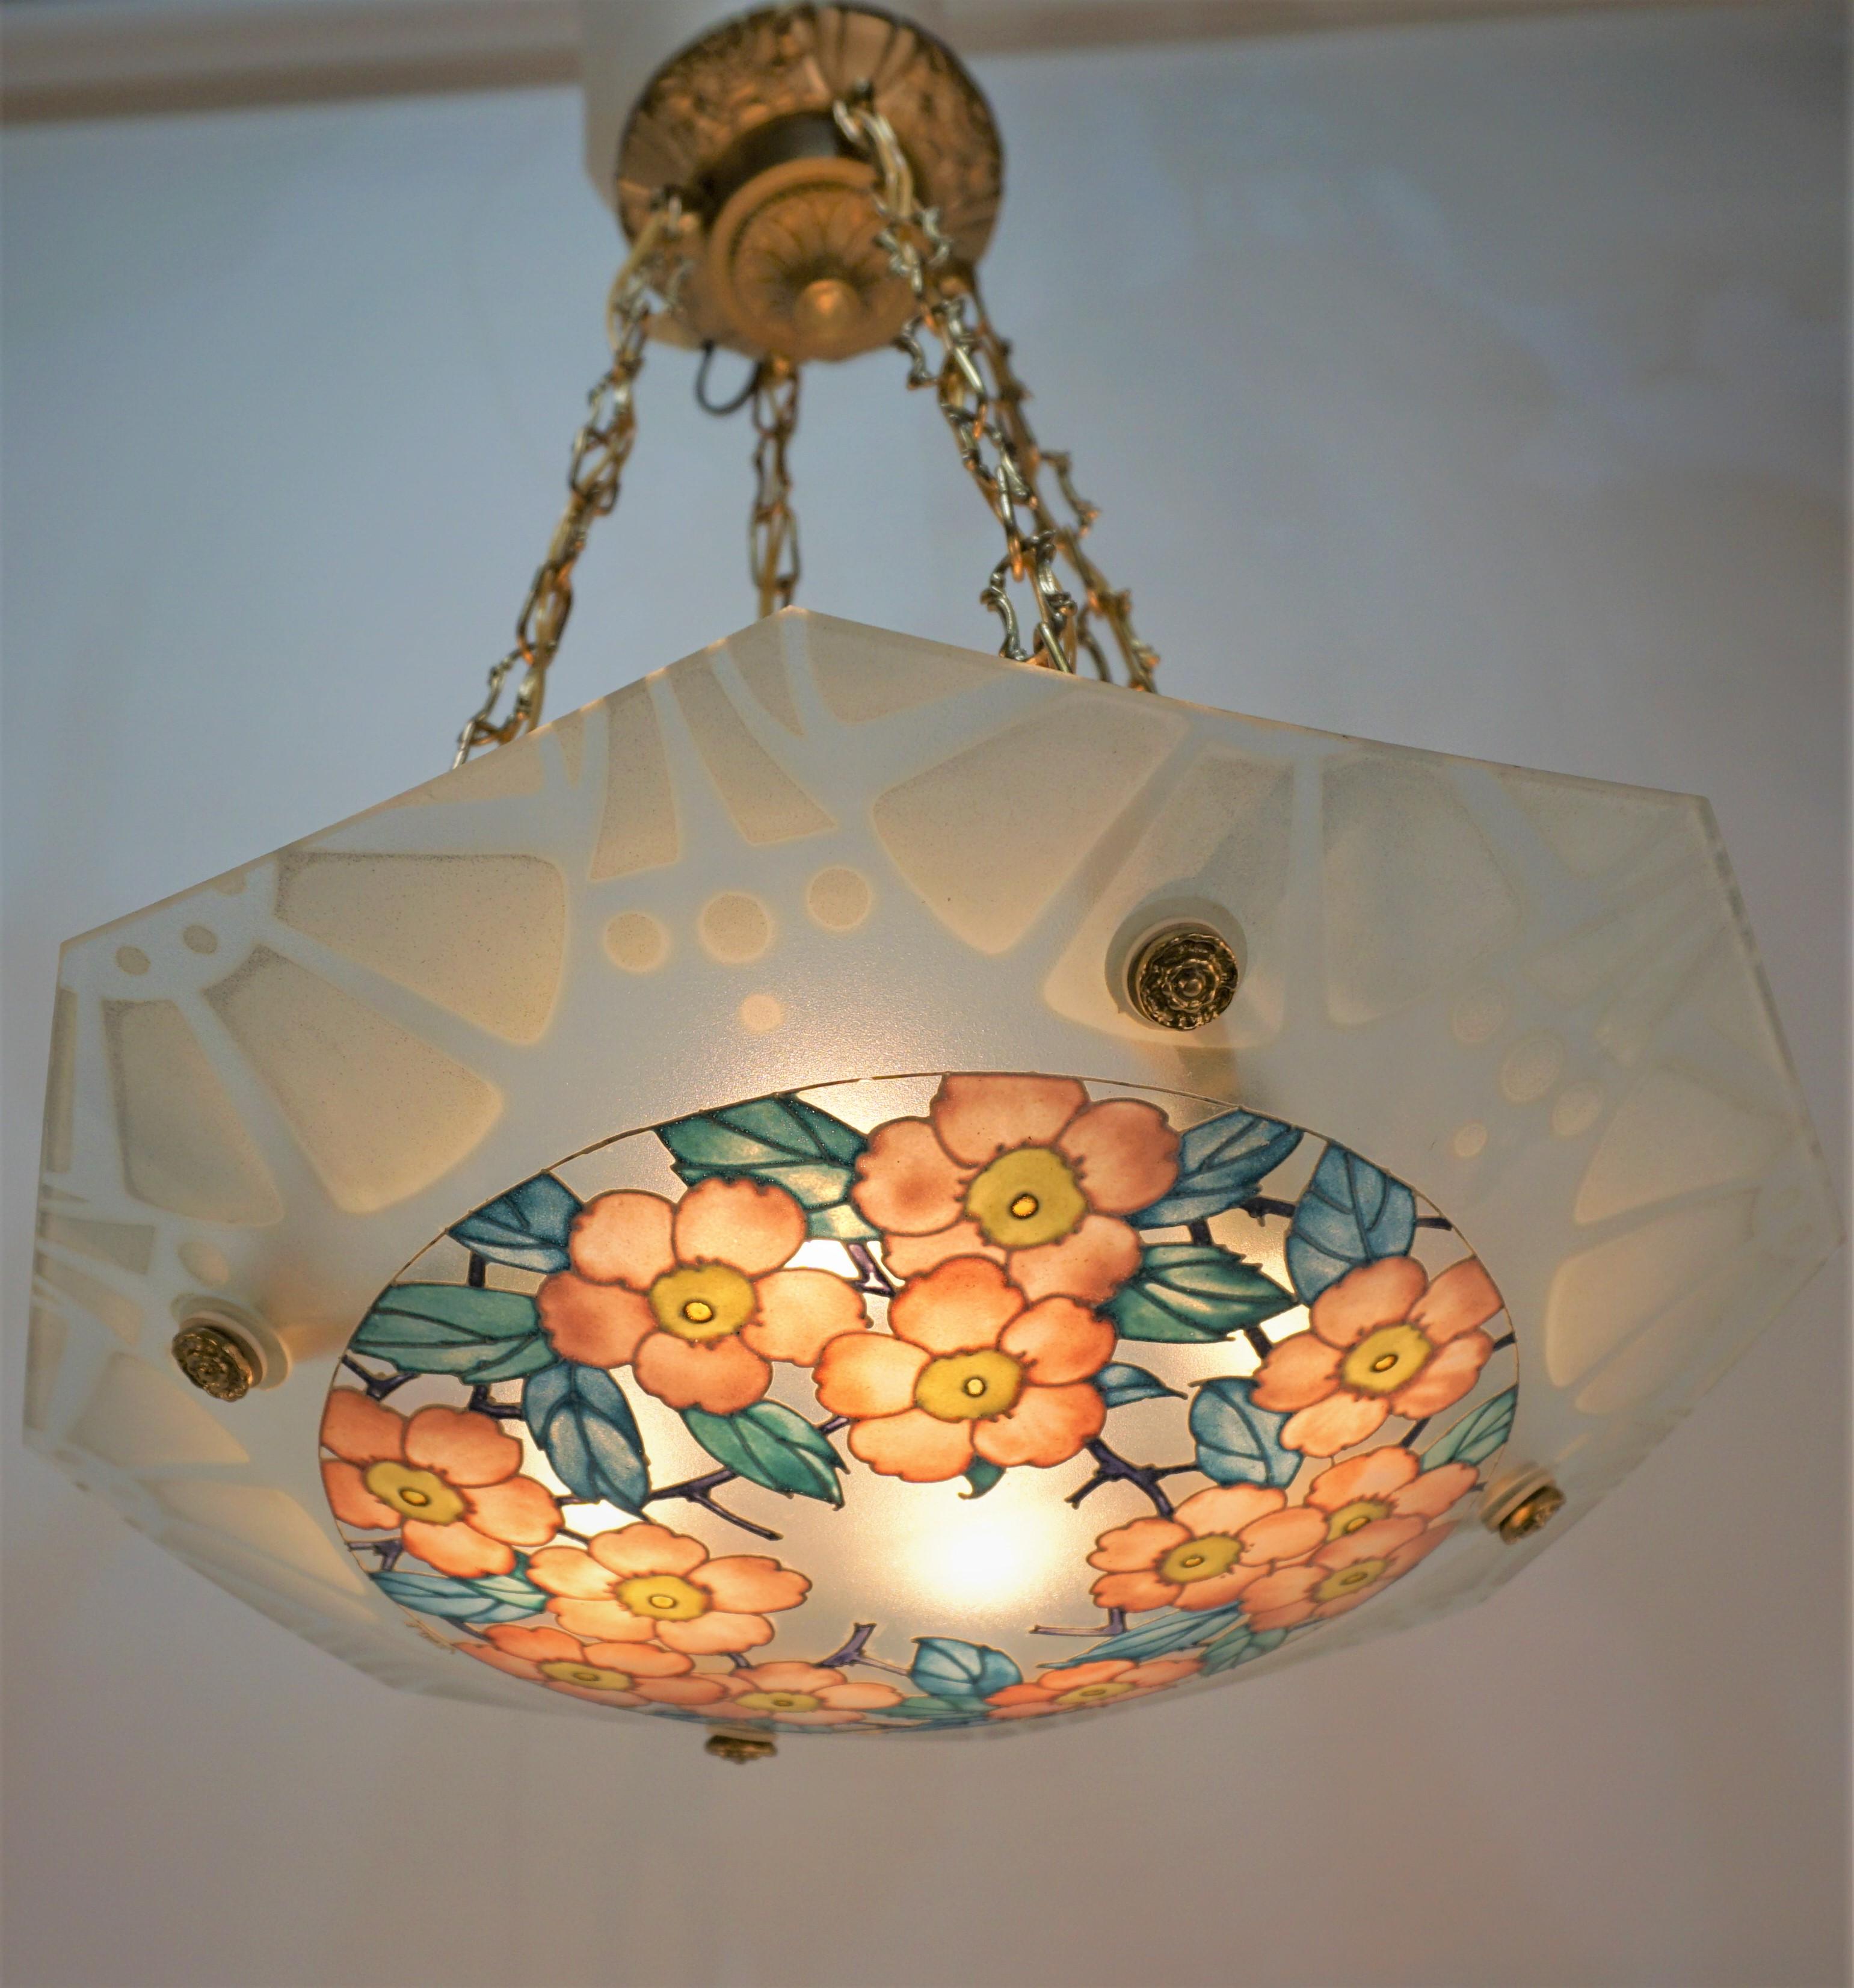 This beautifully hand painted glass chandelier with bronze fitting. The design is flora in pink, yellow, blue and green.  Professionally rewired with four lights and ready for installation.
Height can be adjusted by removing some of the chain.